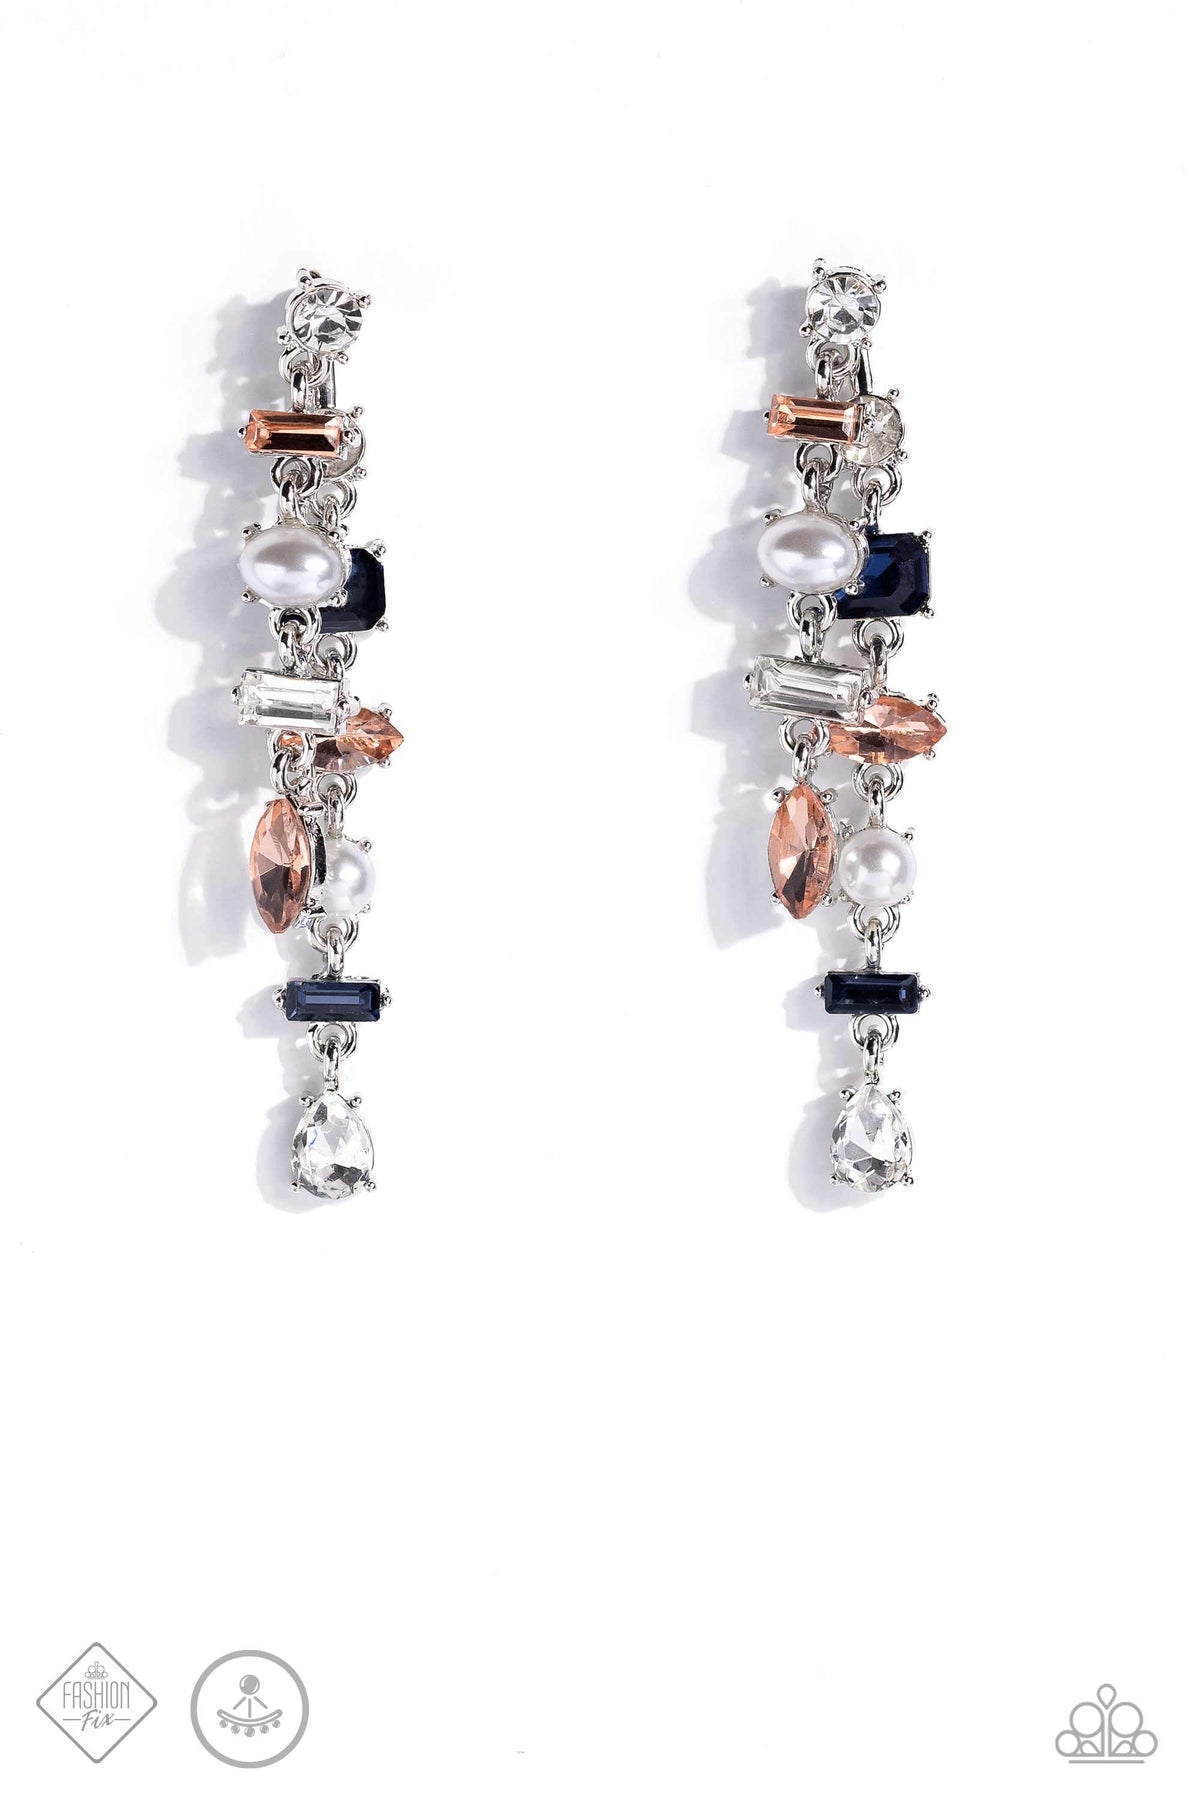 Admirable Antiquity Multi Rhinestone &amp; Pearl Earrings - Paparazzi Accessories- lightbox - CarasShop.com - $5 Jewelry by Cara Jewels